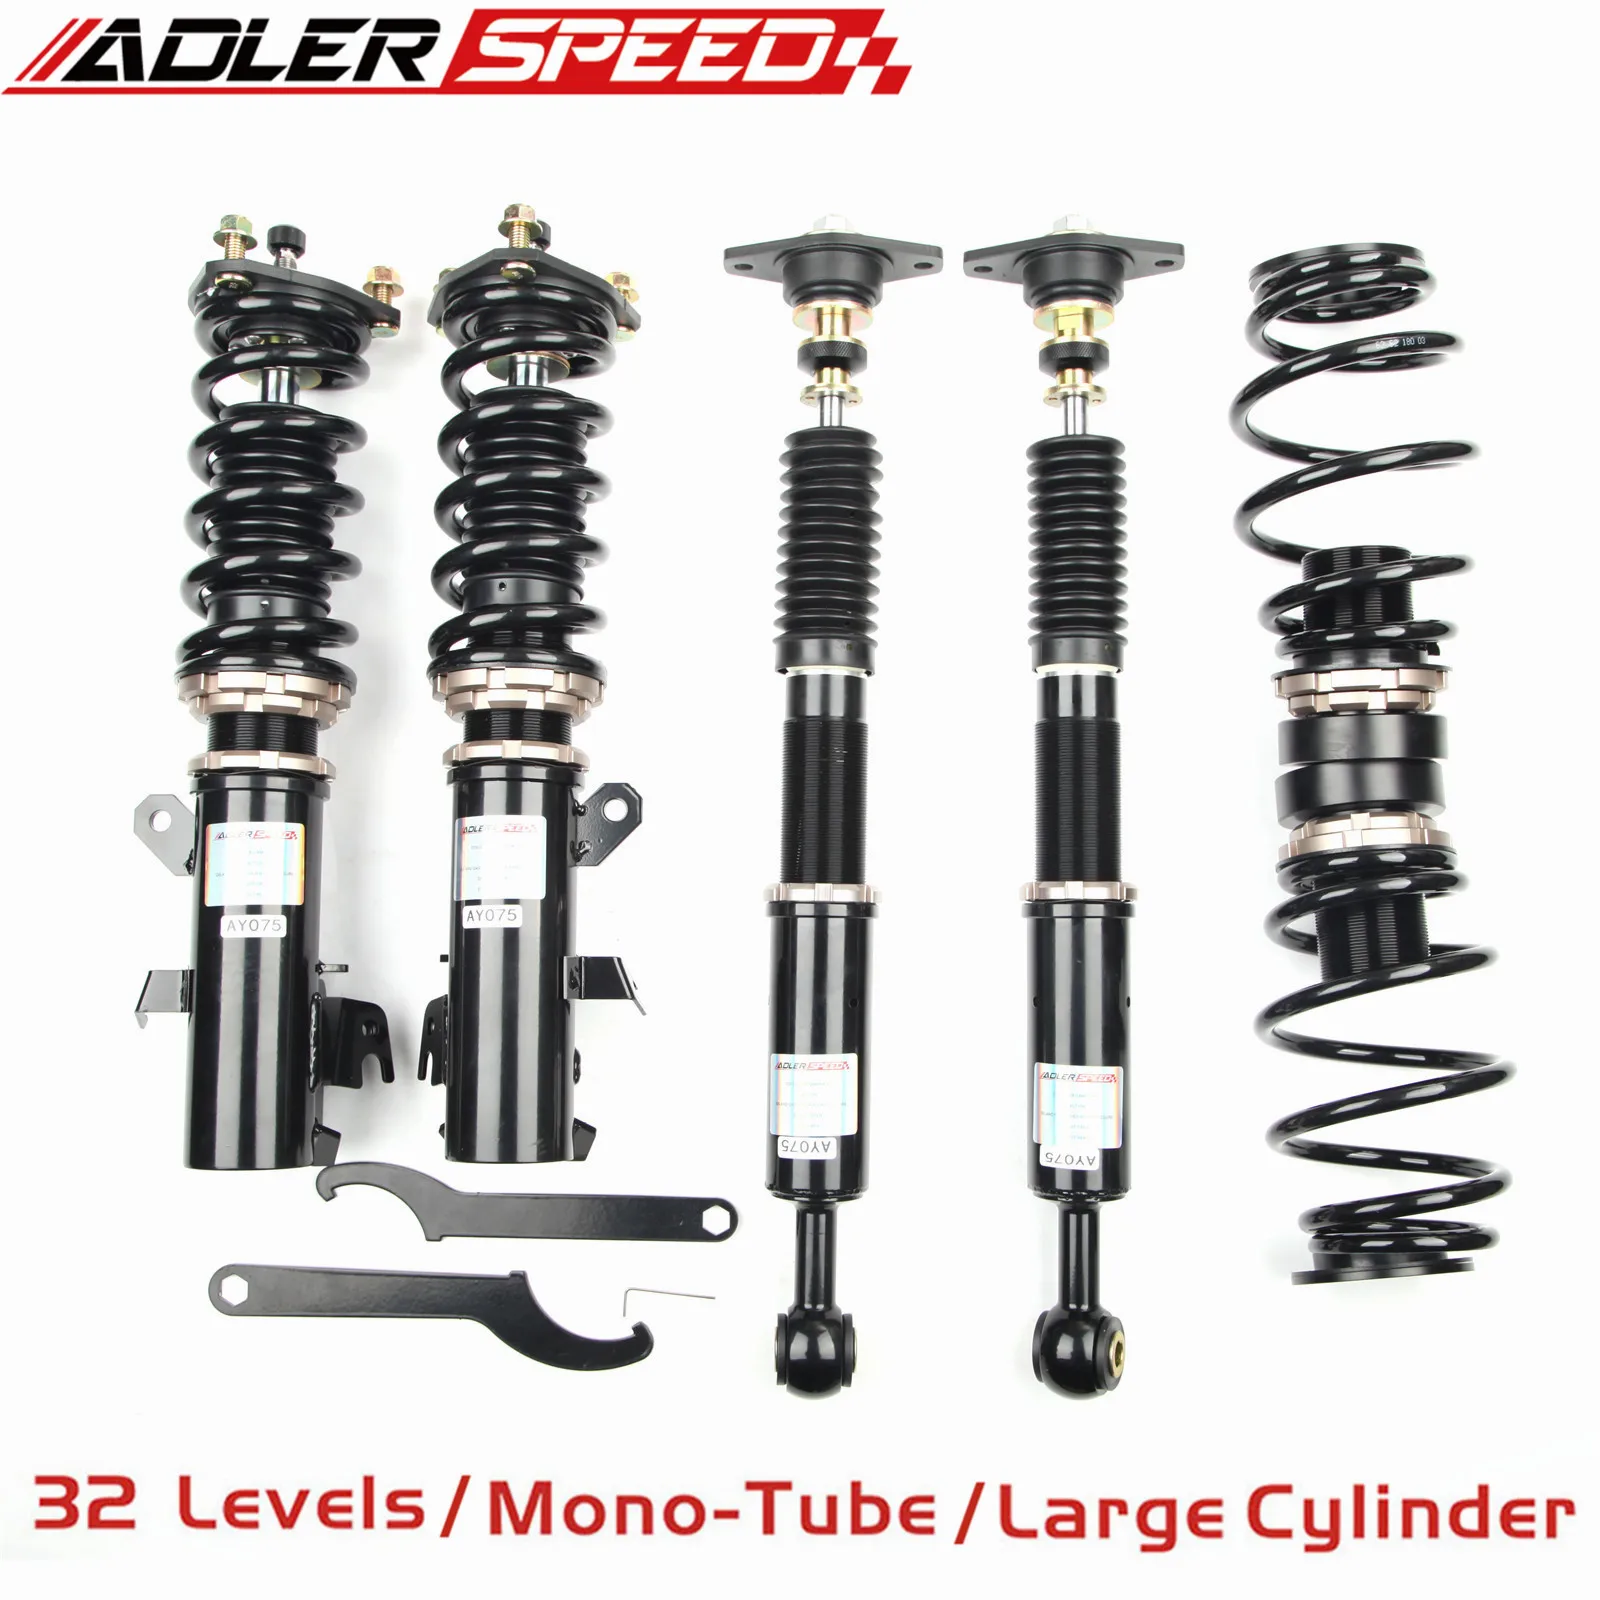 

ADLERSPEED 32 Levels Coilovers Suspension Kits For Ford Fiesta 11-18 / Mazda 2 11-14